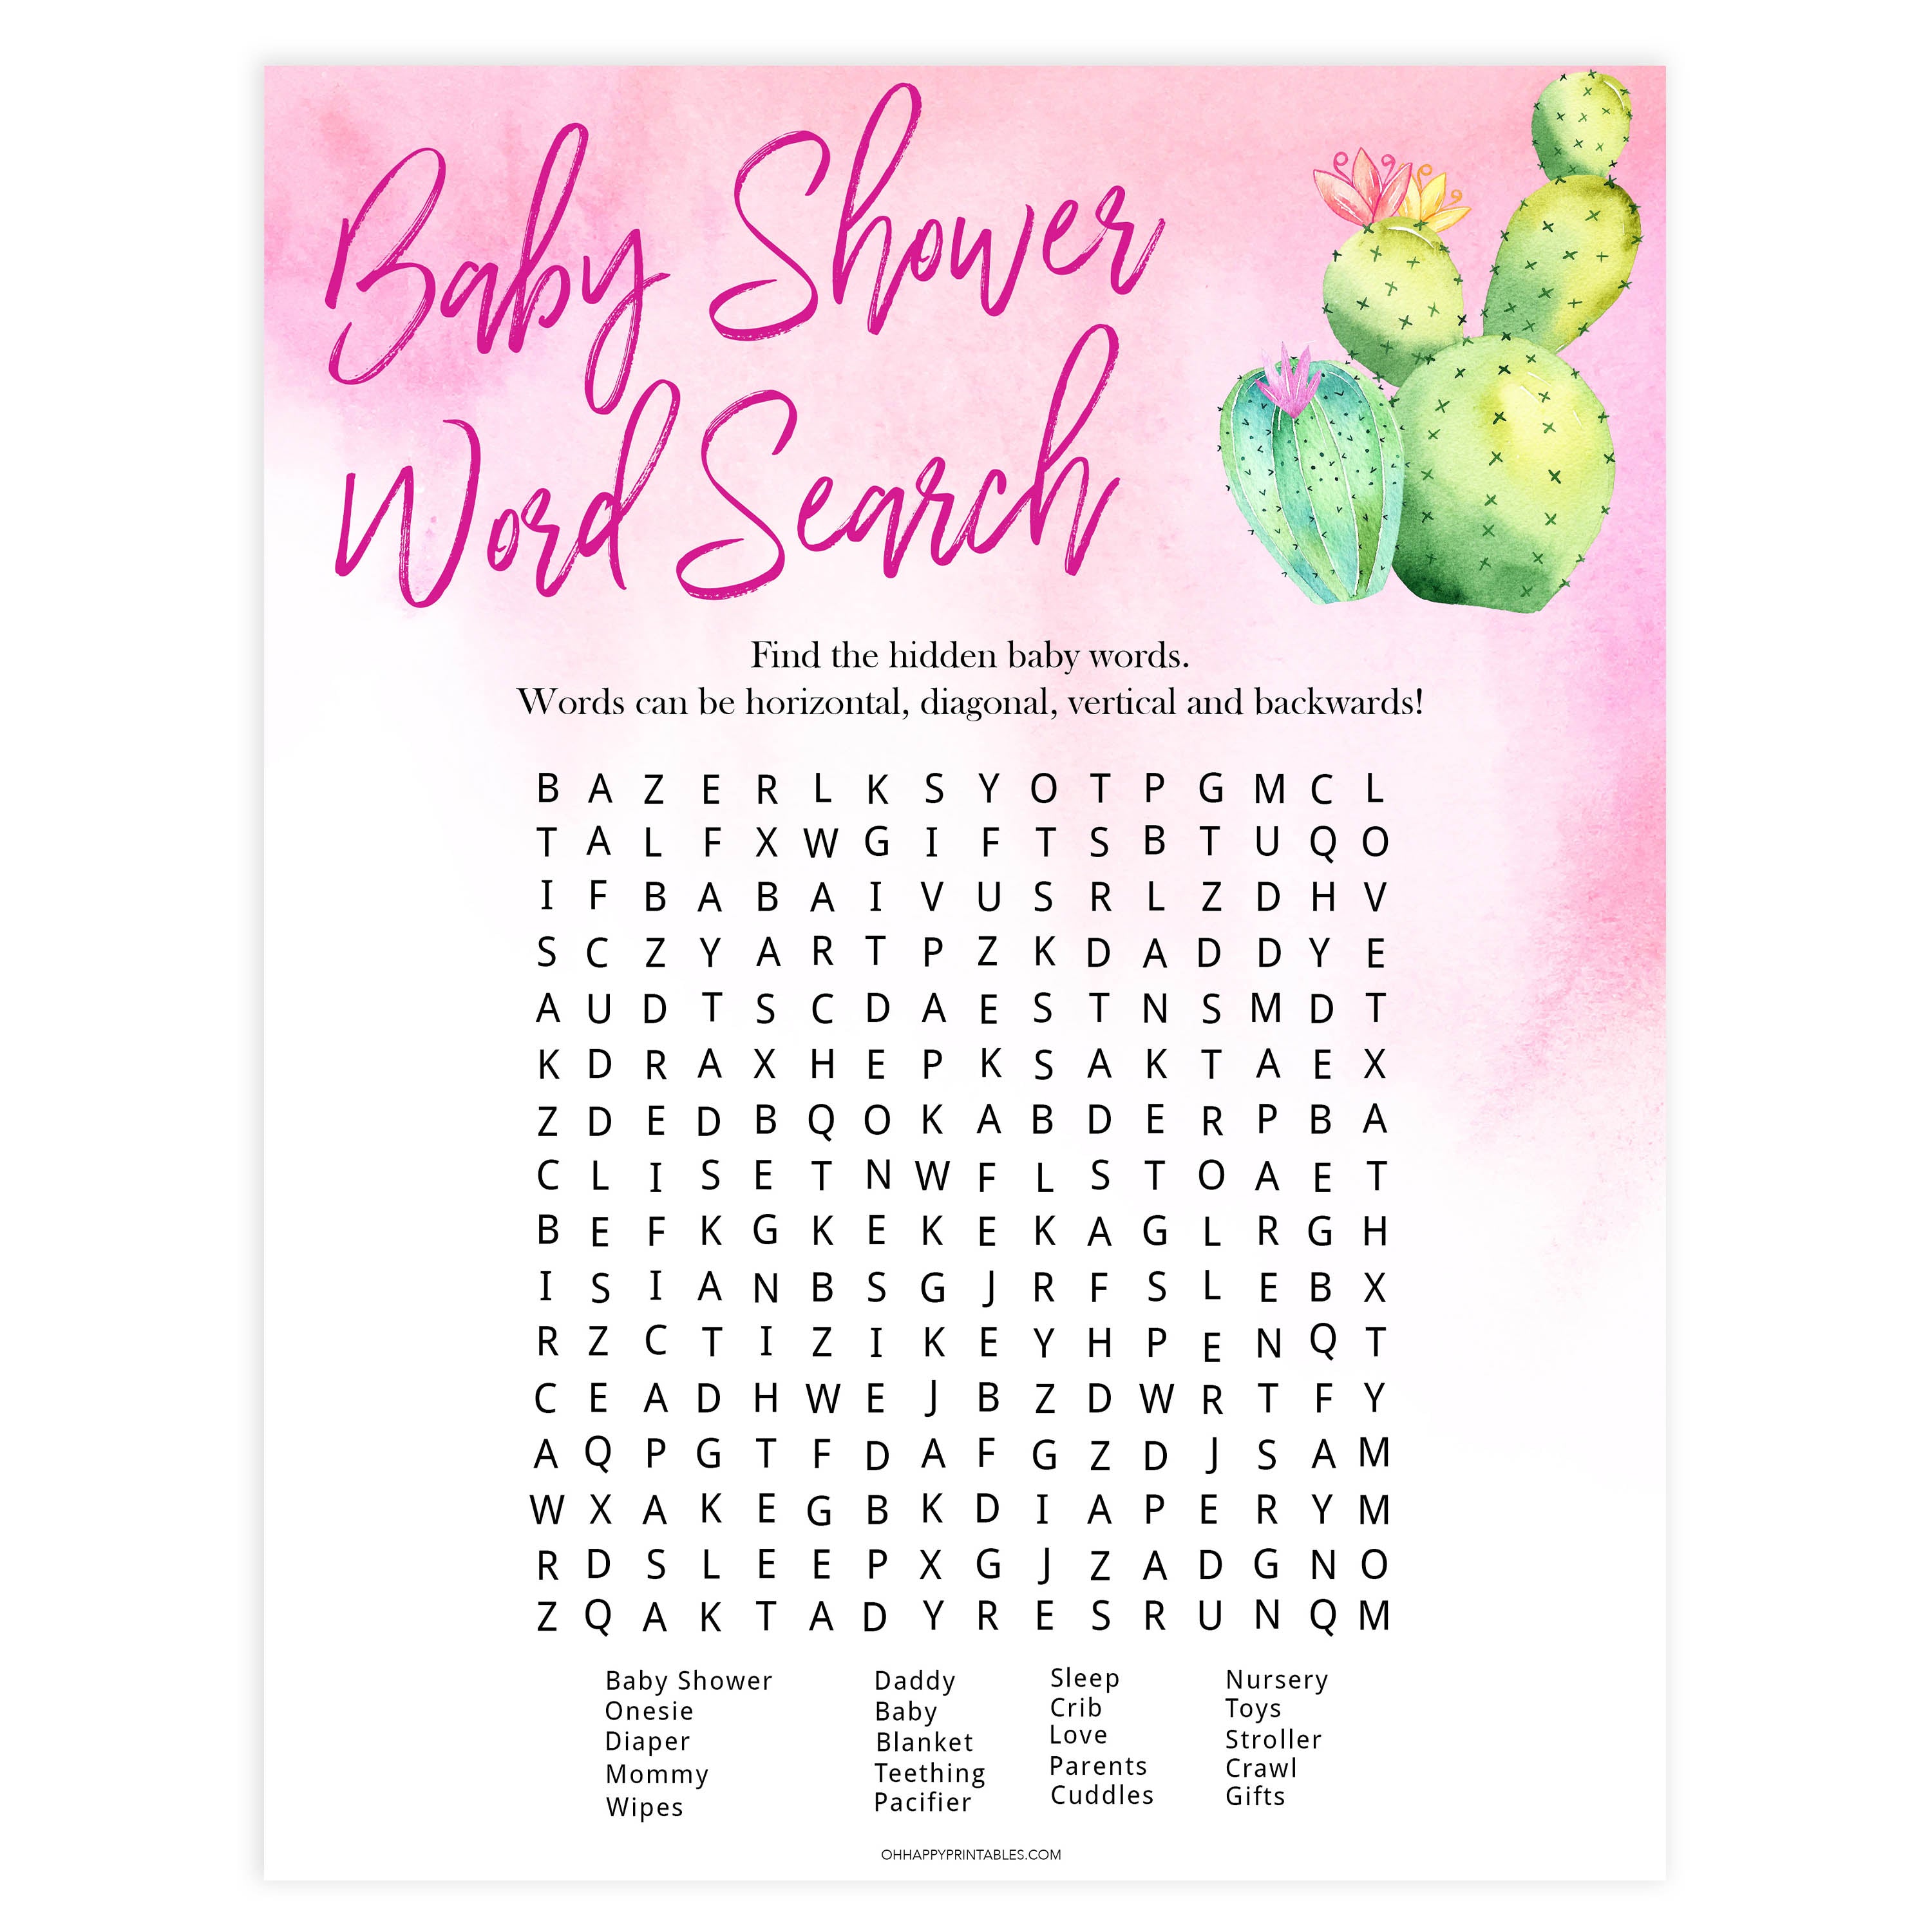 Cactus baby games, baby shower word search, baby word search, printable baby shower games, Mexican baby shower, fun baby games, top baby games, best baby games, baby shower games